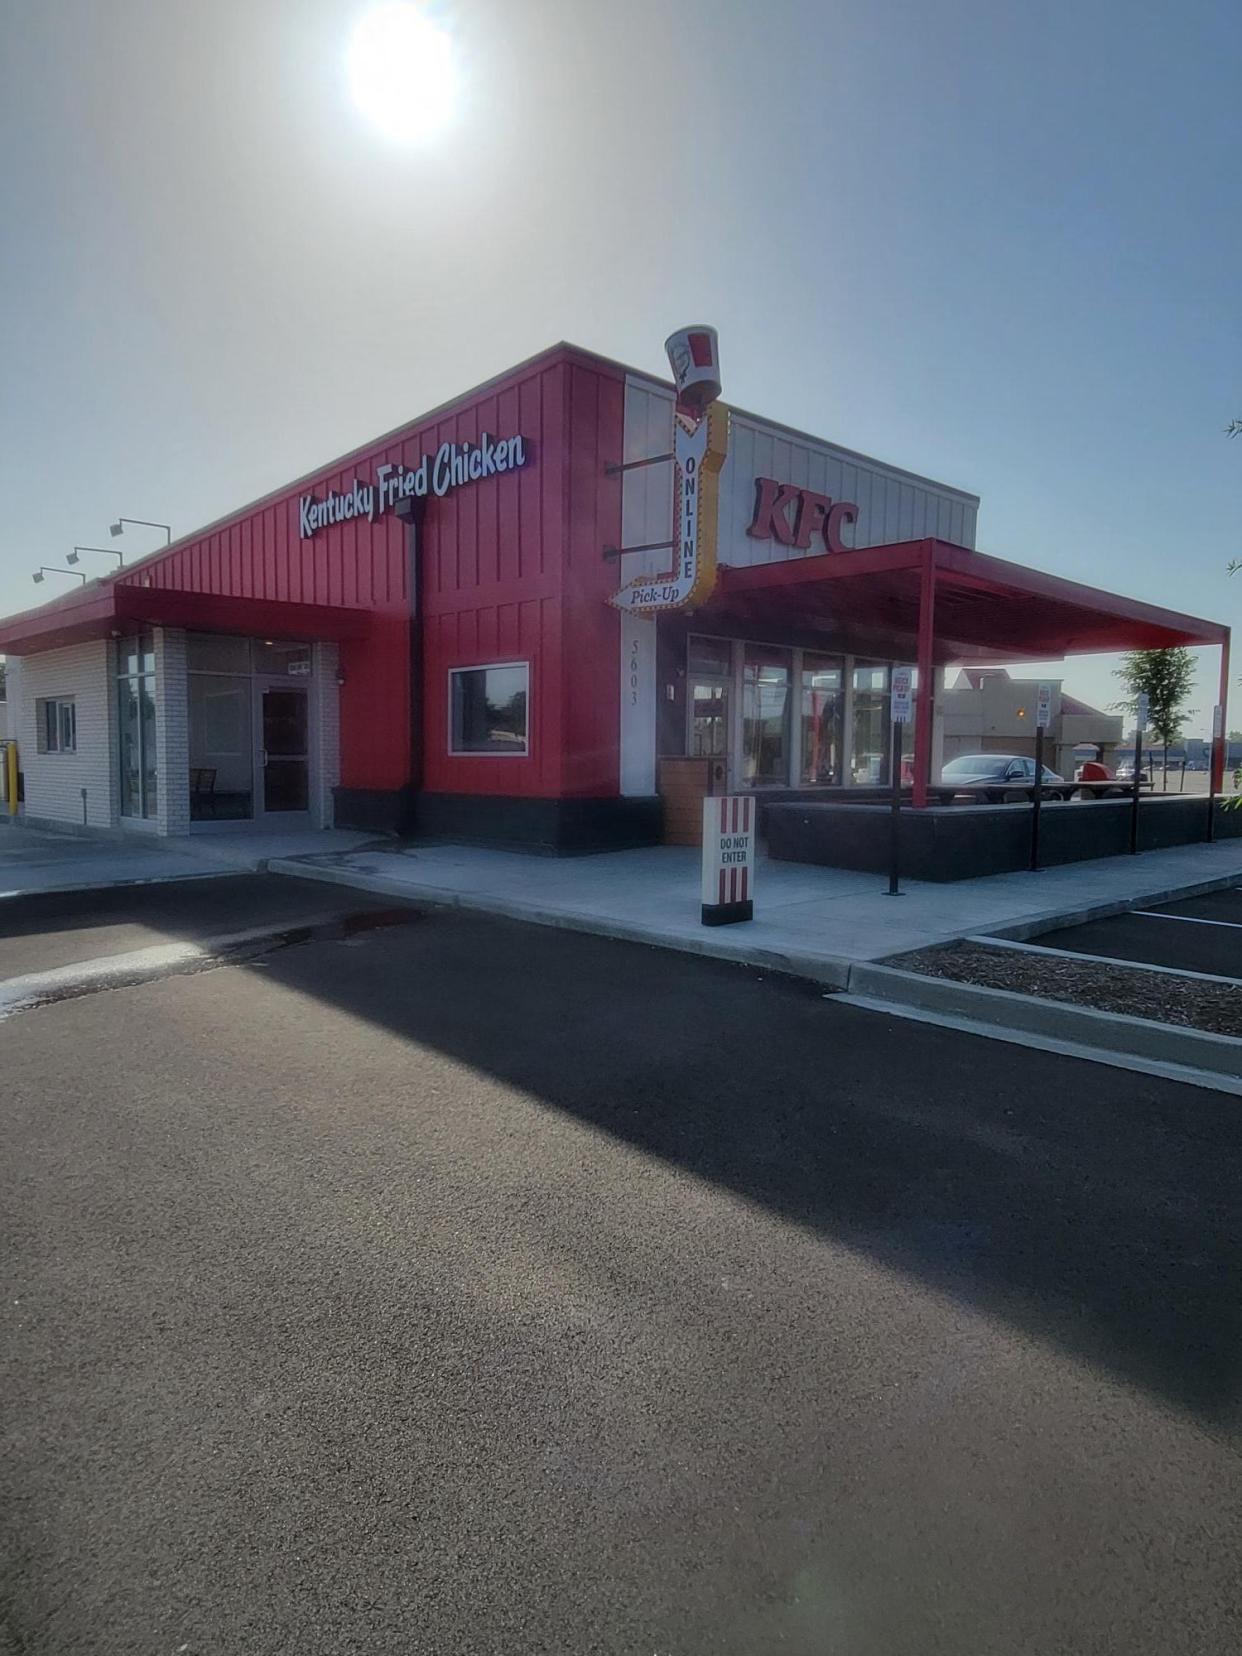 The "Next Gen" KFC store offers new features including a brightly lit red bucket pointing to an entrance just for pick up orders and dedicated parking spots for online orders.